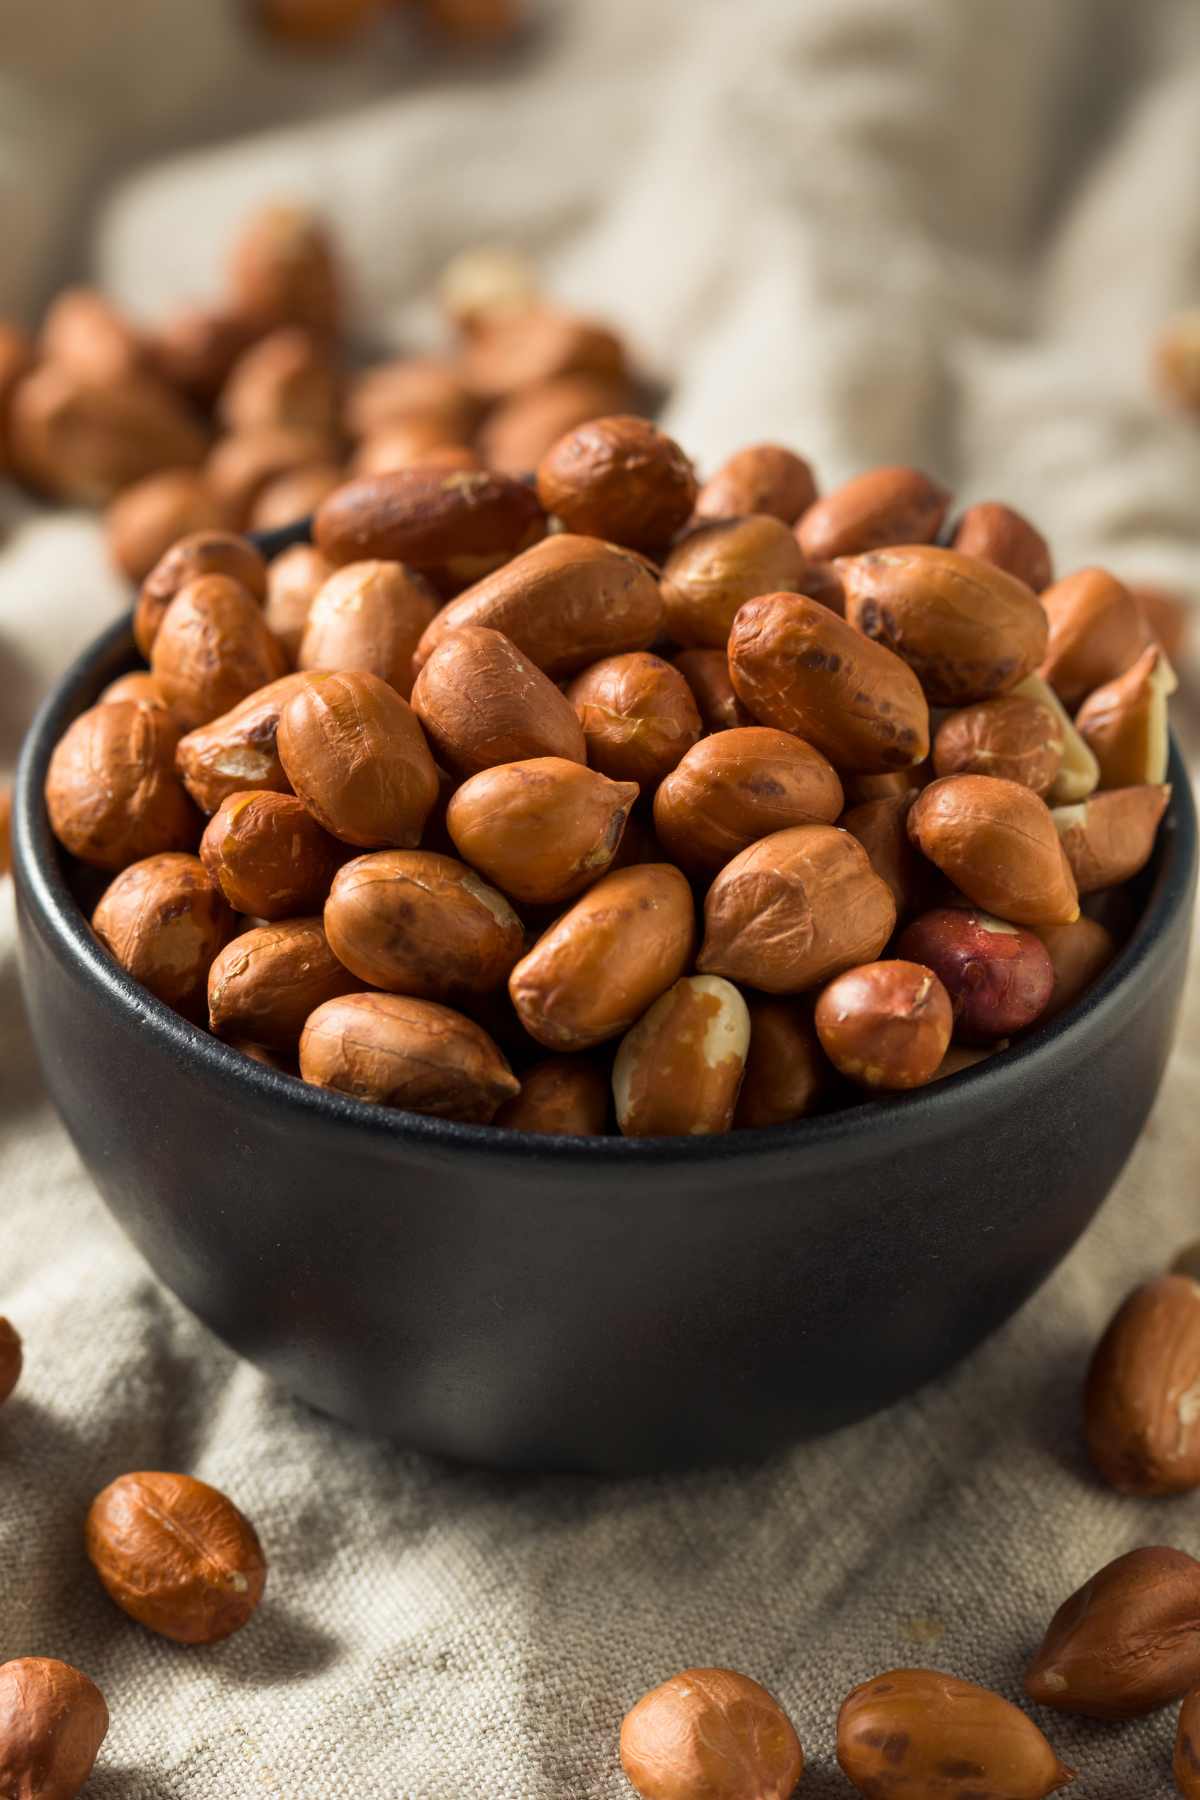 Are peanuts keto? How many carbs or net carbs are in peanuts? With the growing popularity of the ketogenic diet, you may wonder whether peanuts are ok to eat for this low-carb, high-fat diet. In this post, you’ll learn whether peanuts are keto-friendly and other nuts that you can and cannot eat on keto.